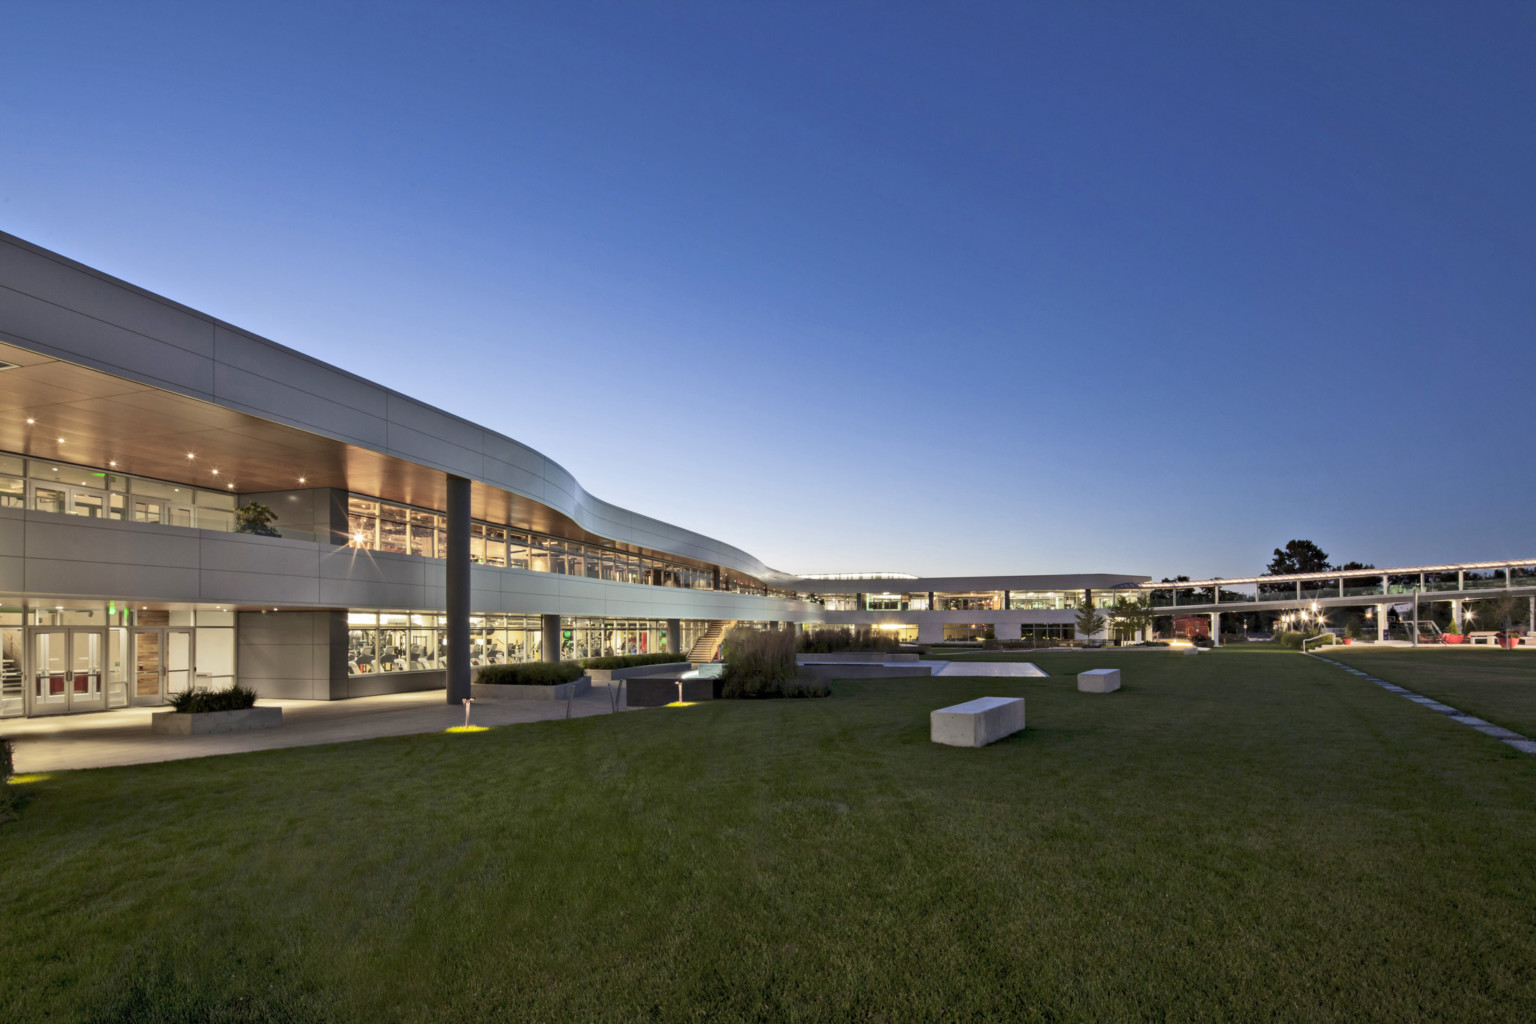 curvaceous silver 2 story campus building with patio and balcony and floor to ceiling windows illuminated at dusk